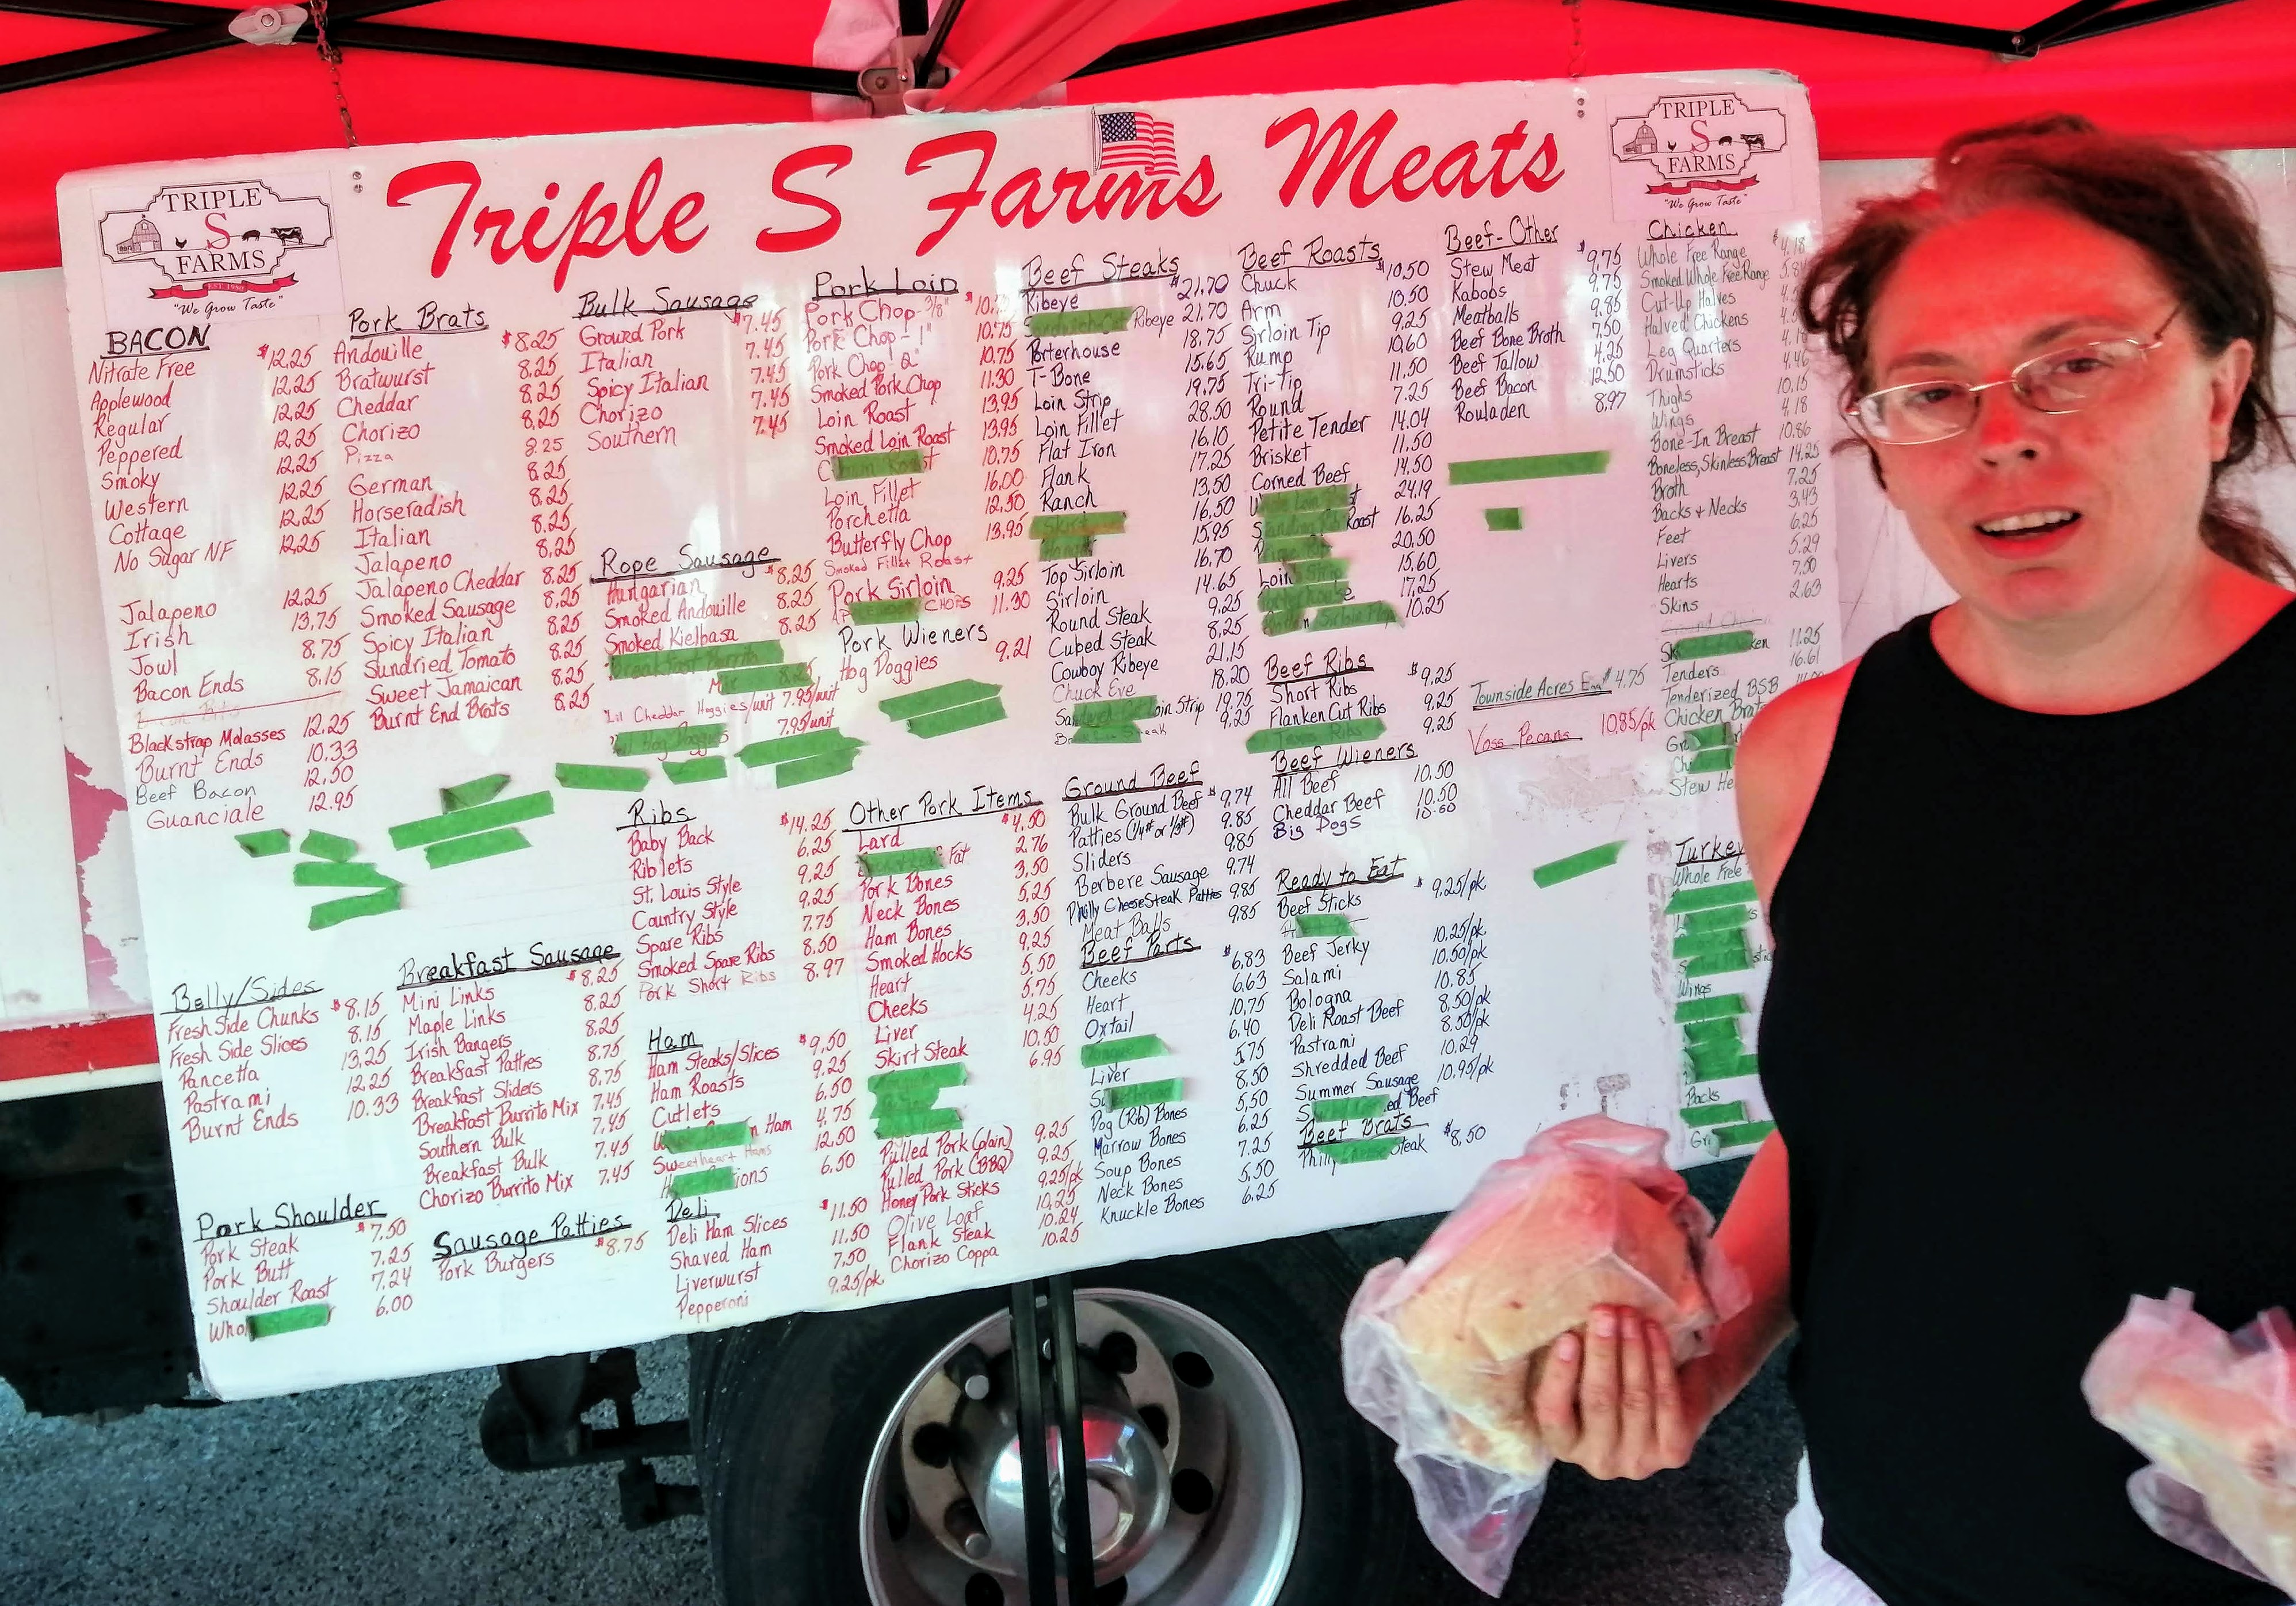 A woman holding two frozen packages of chicken in front of a very large hand-written menu board. Photo by Paul Young.